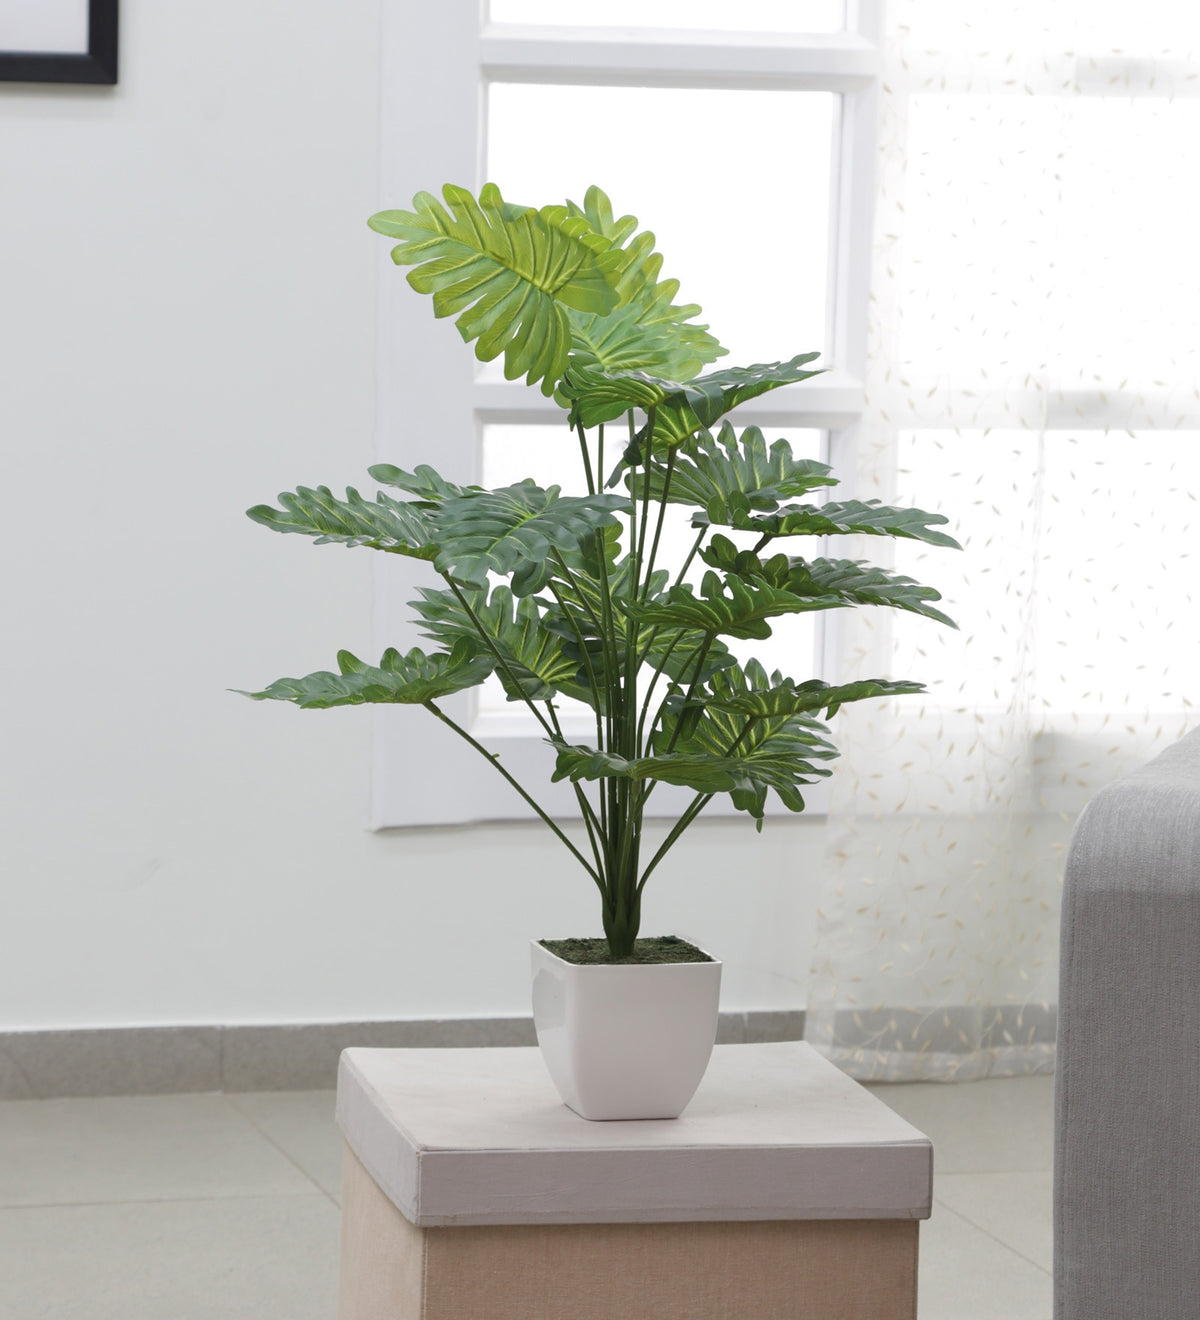 Artificial Philodendron Plant for Home, Office Decor Ornamental Plant for Interior Decor/Home Decor/Office Décor (18 Medium Size Leaves Plant, 75 cm Tall)